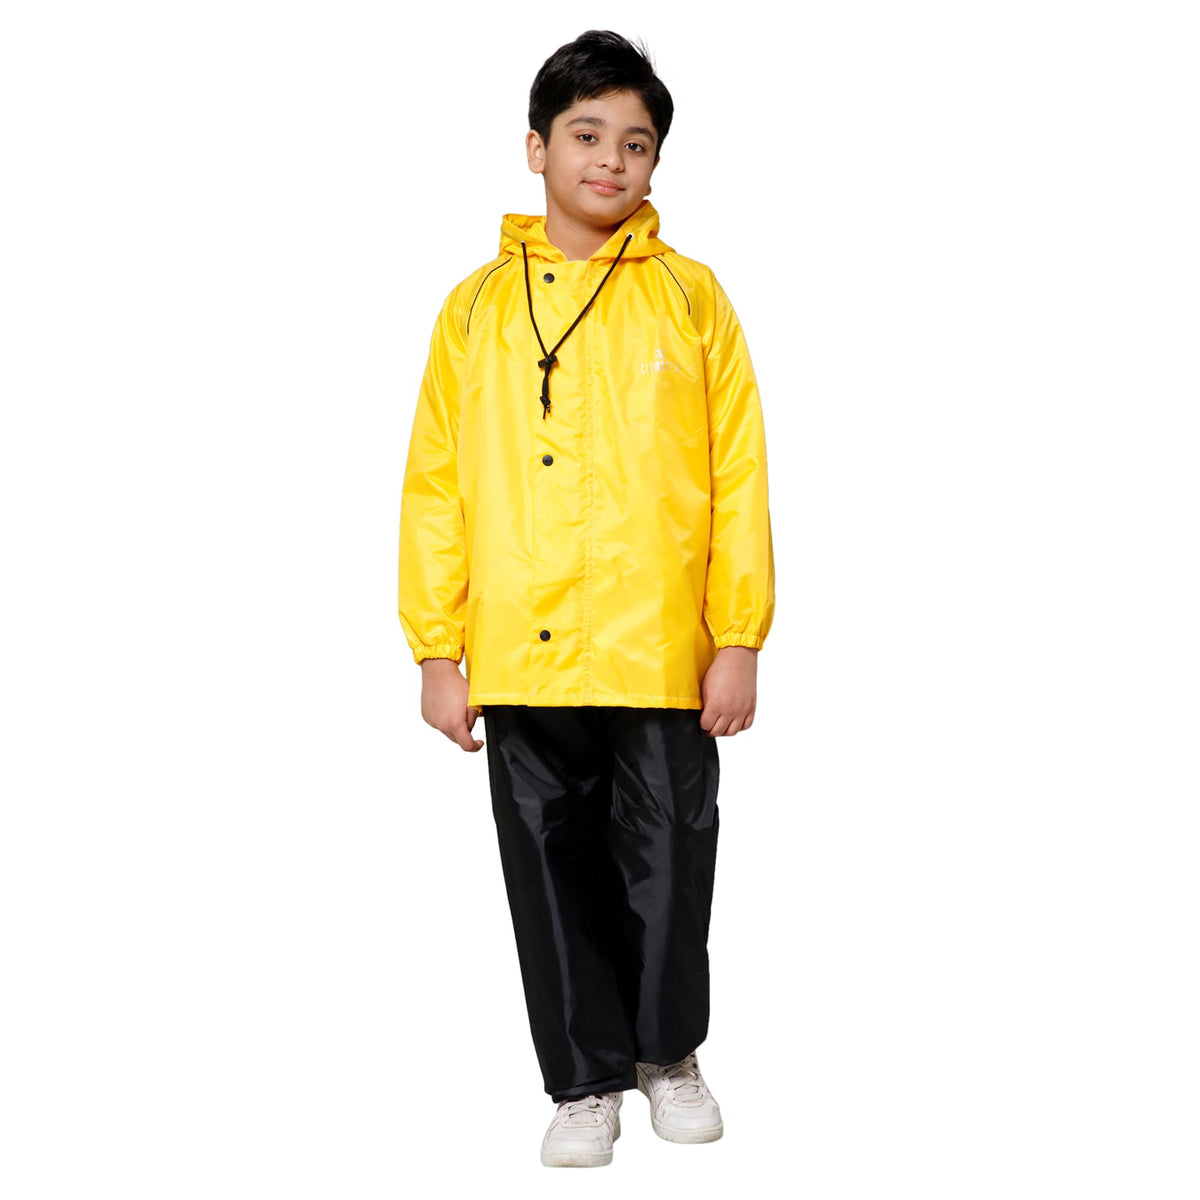 THE CLOWNFISH Duke Series Kids Waterproof Polyester Double Coating Reversible Raincoat with Hood and Reflector Logo at Back. Set of Top and Bottom. Printed Plastic Pouch. Kid Age-14-16 years (Yellow)